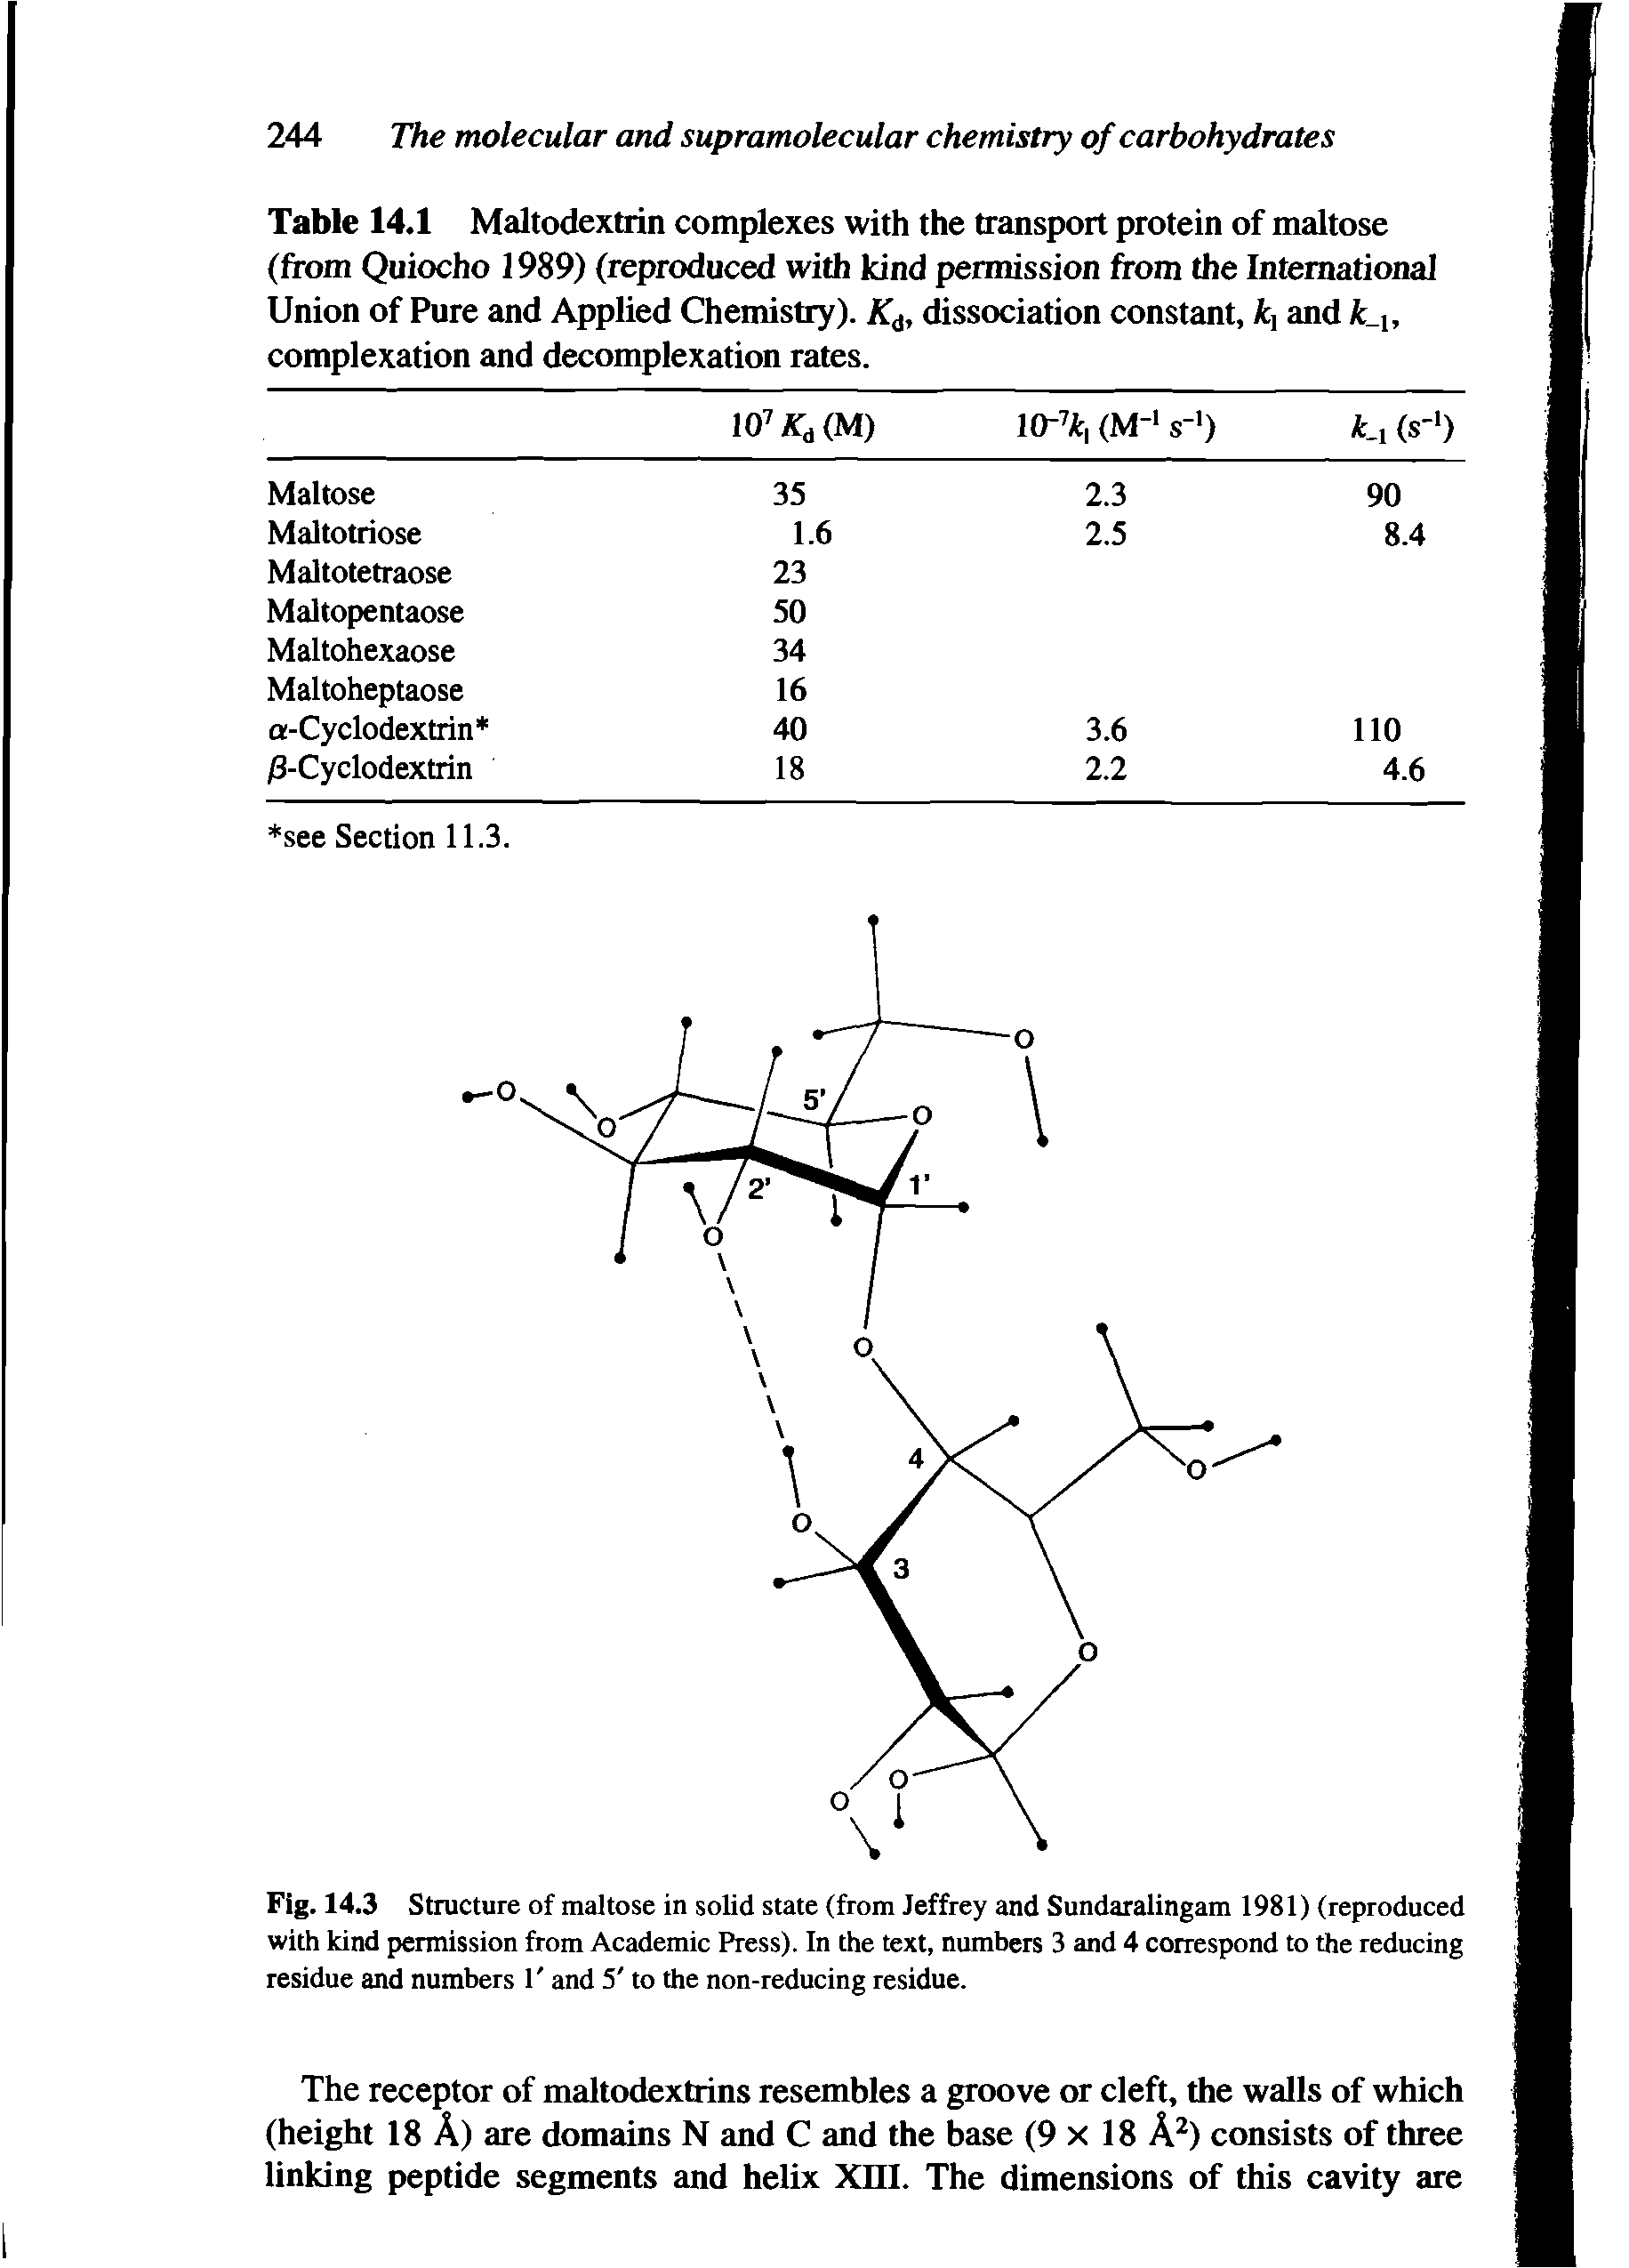 Table 14.1 Maltodextrin complexes with the transport protein of maltose (from Quiocho 1989) (reproduced with kind permission from the International Union of Pure and Applied Chemistry). K<j, dissociation constant, kj and k i, complexation and decomplexation rates.